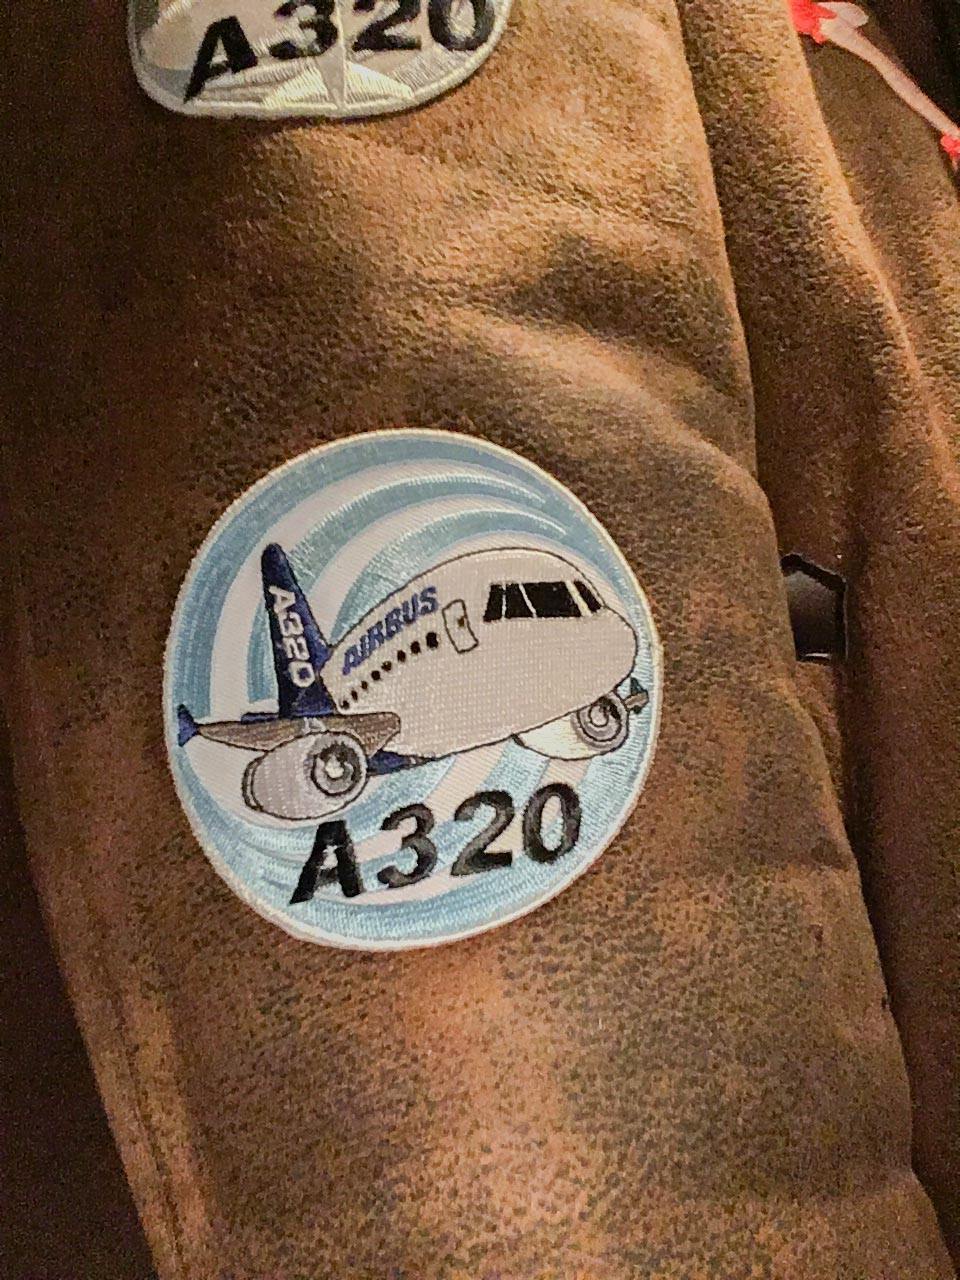 PATCH AIRBUS A320 CHUBBY PLANE Bomber Jacket sew-on or iron-on large size A 320